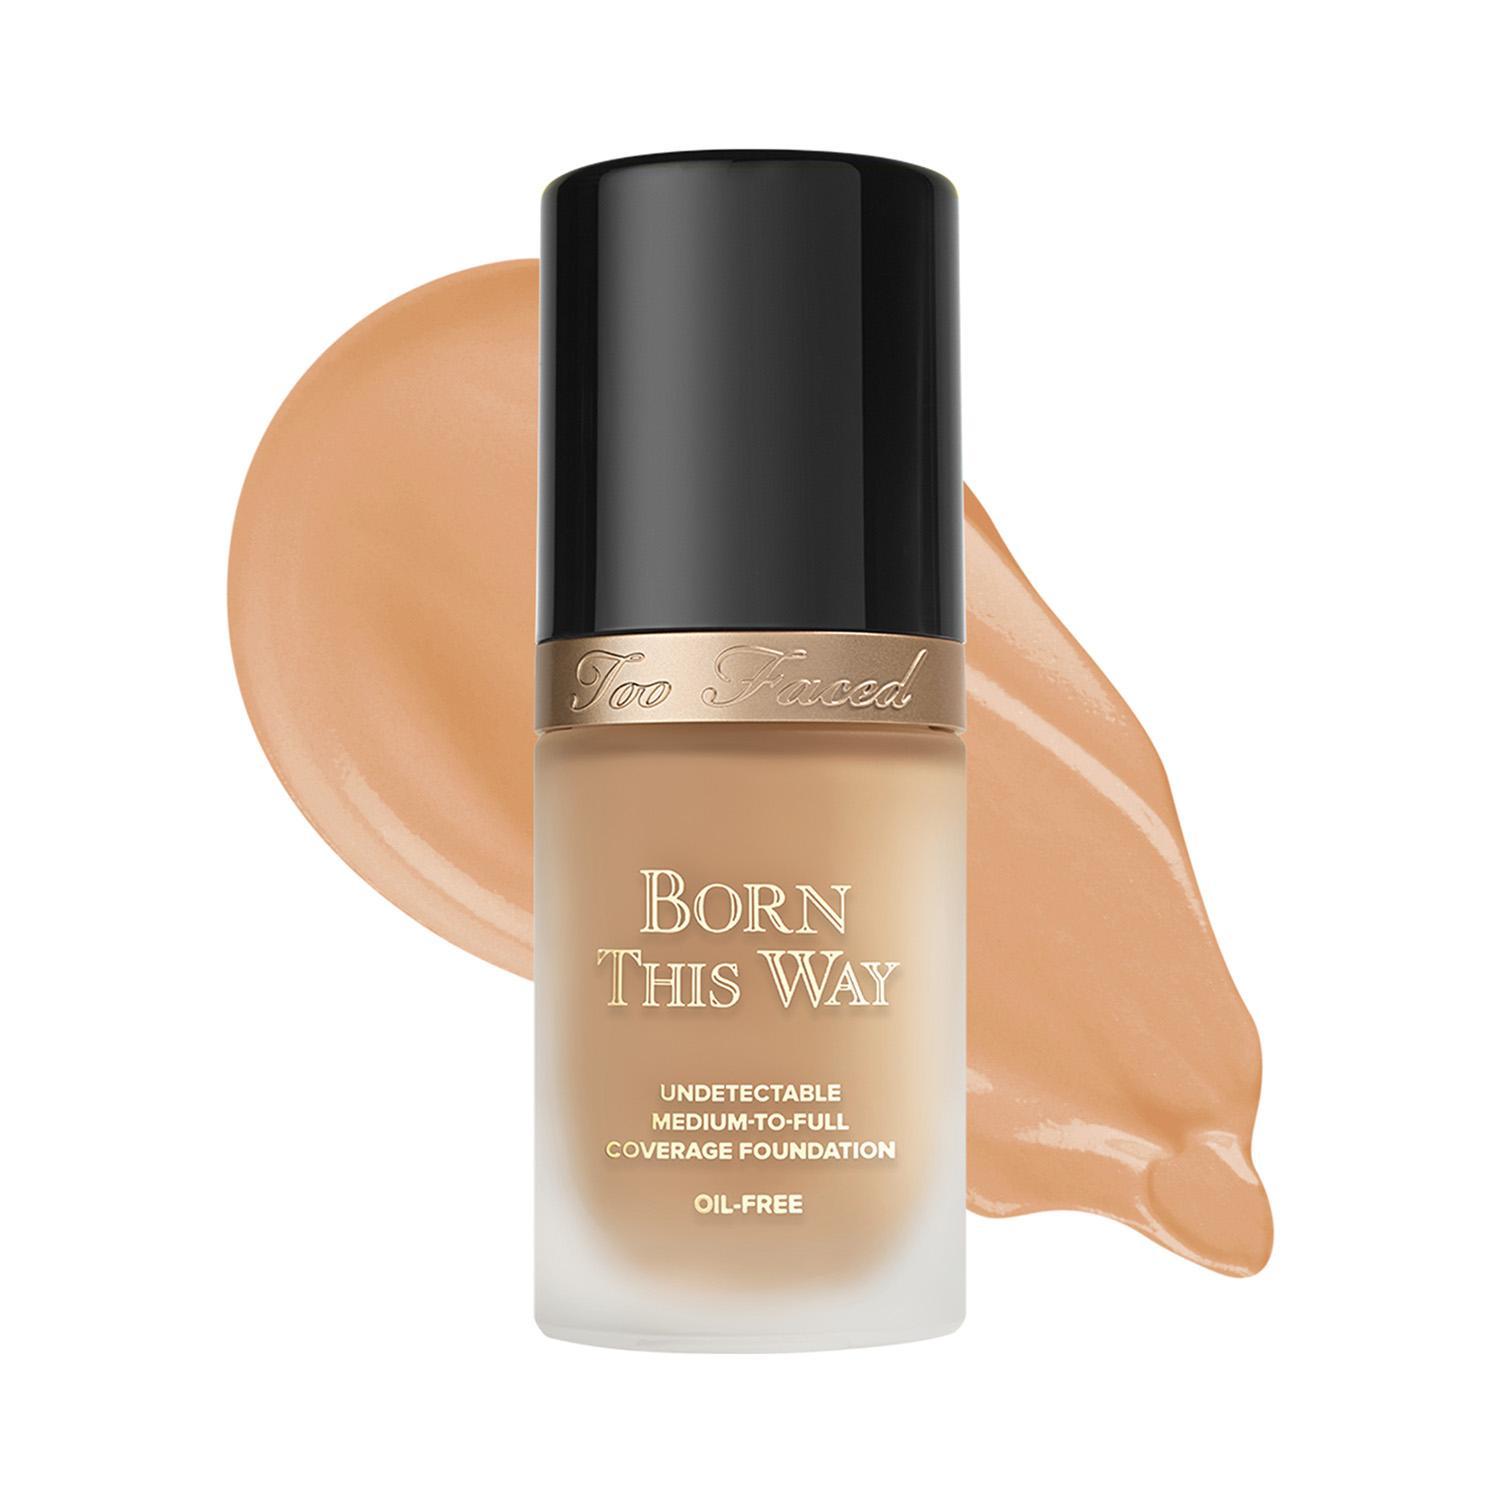 too faced born this way foundation - natural beige (30ml)